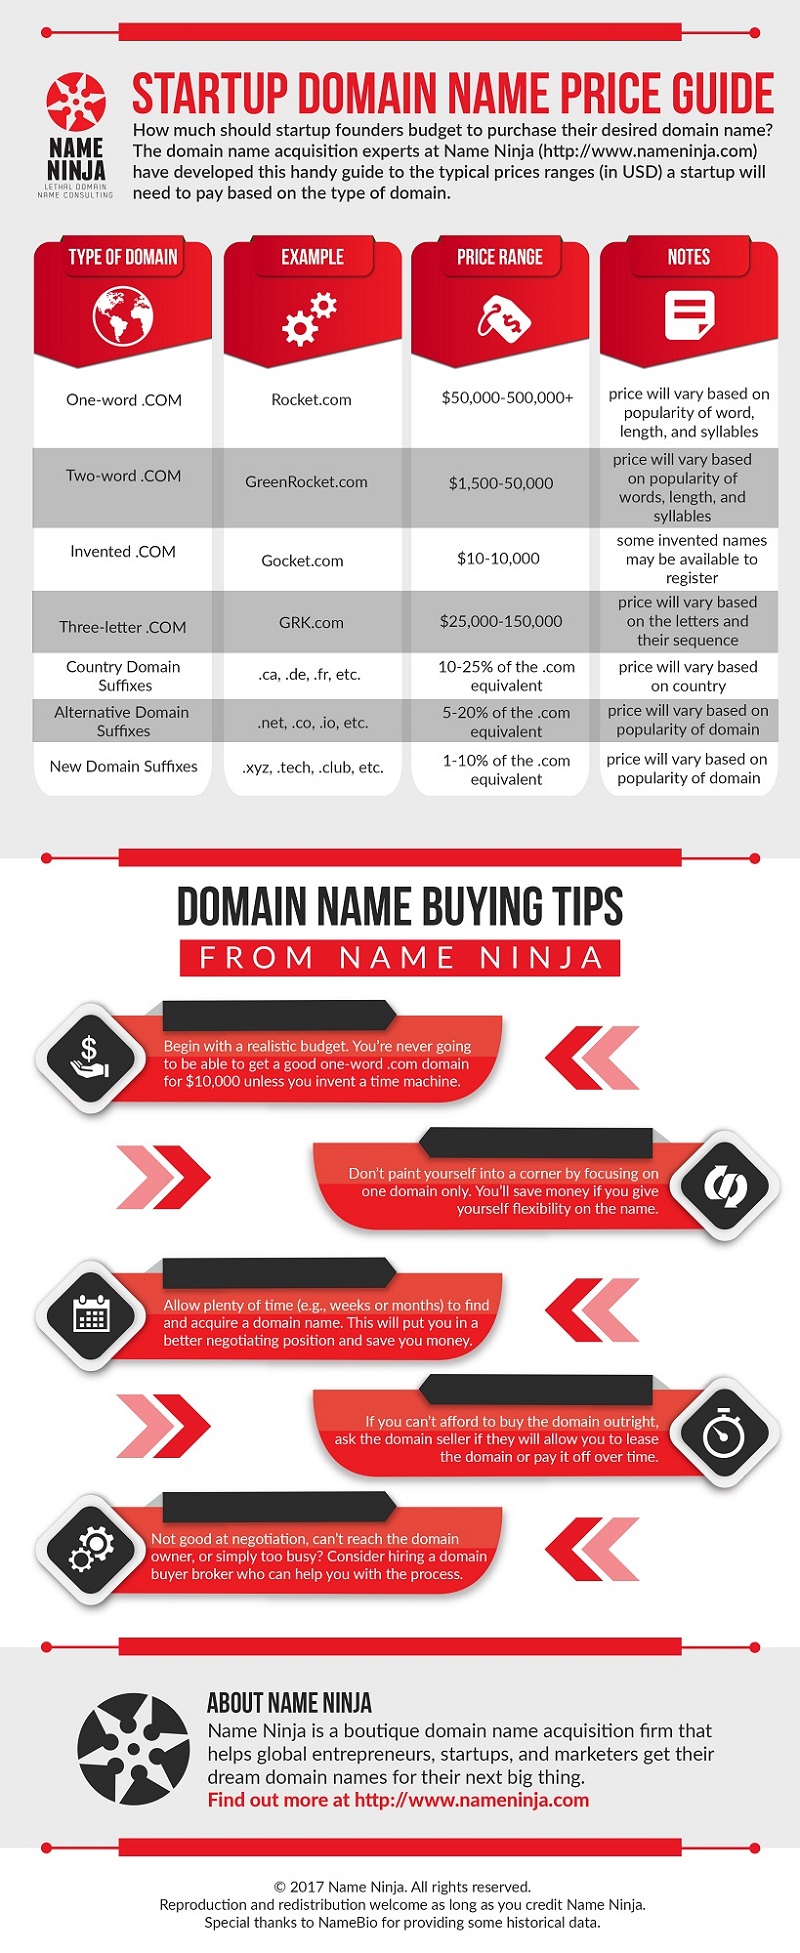 Infographic Domain Retail Sales Prices; Name Ninja Setting ‘Right